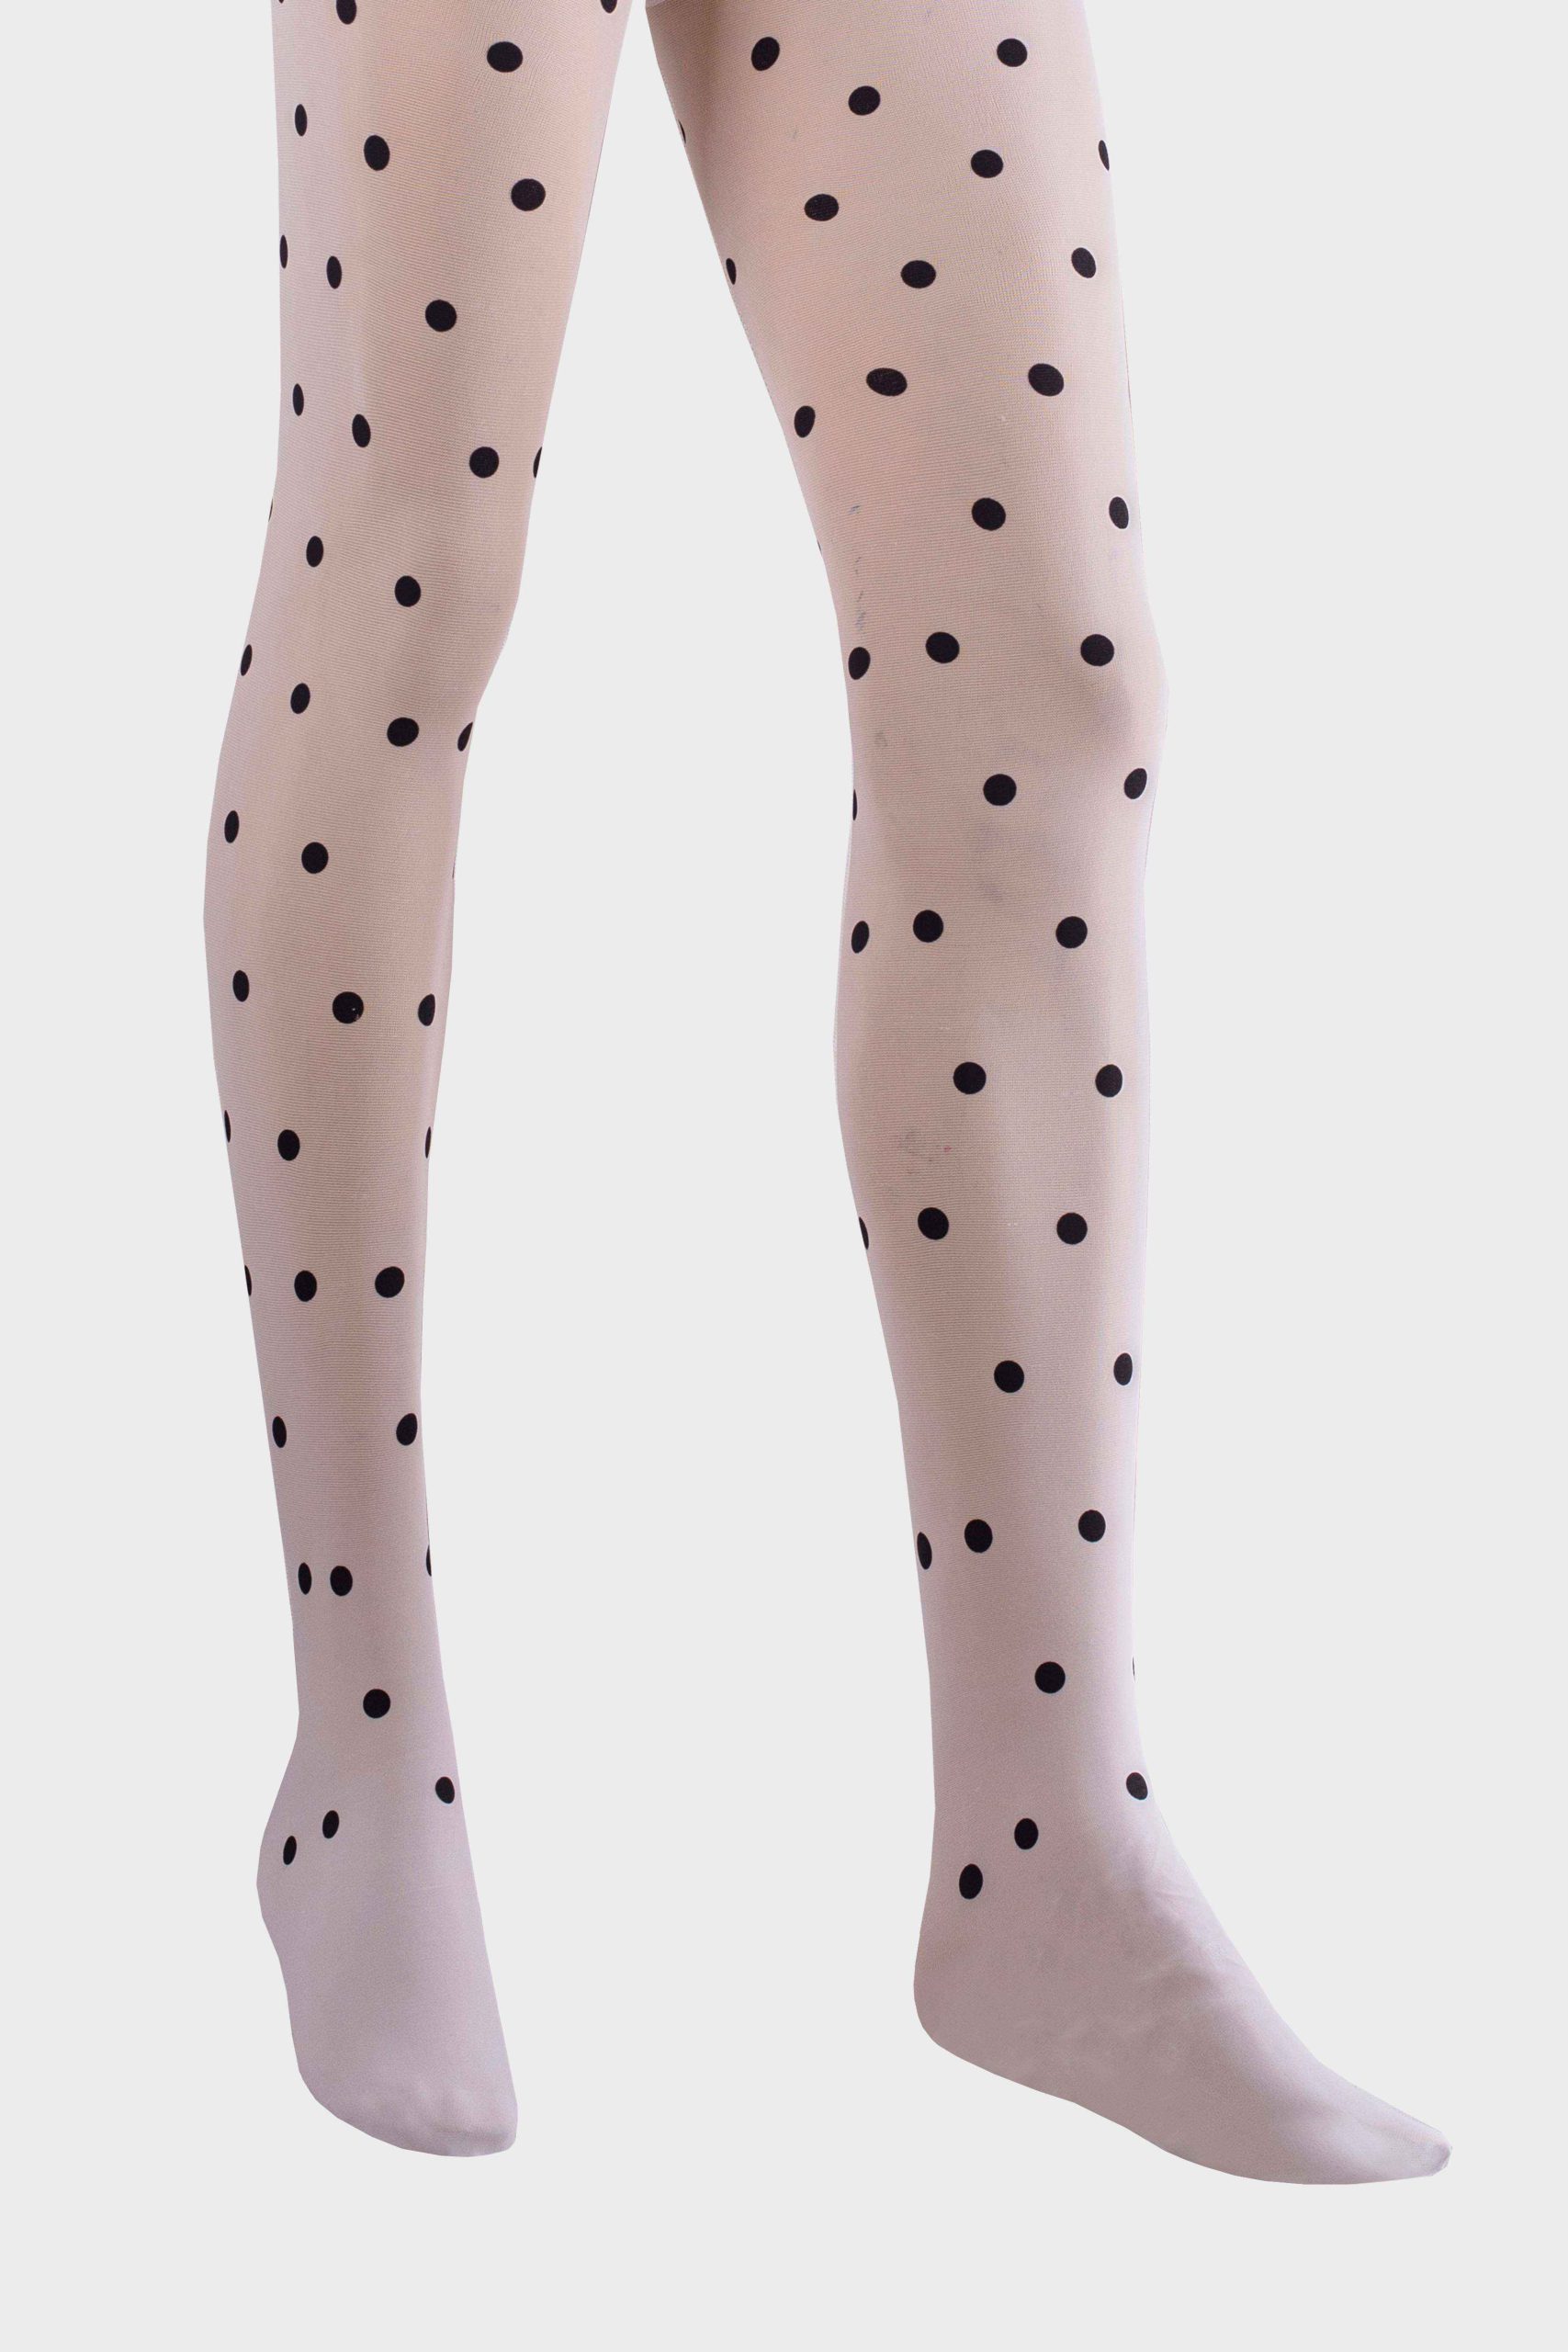 White Tights With Black Polka Dots 🏷 - Tattoo Tights